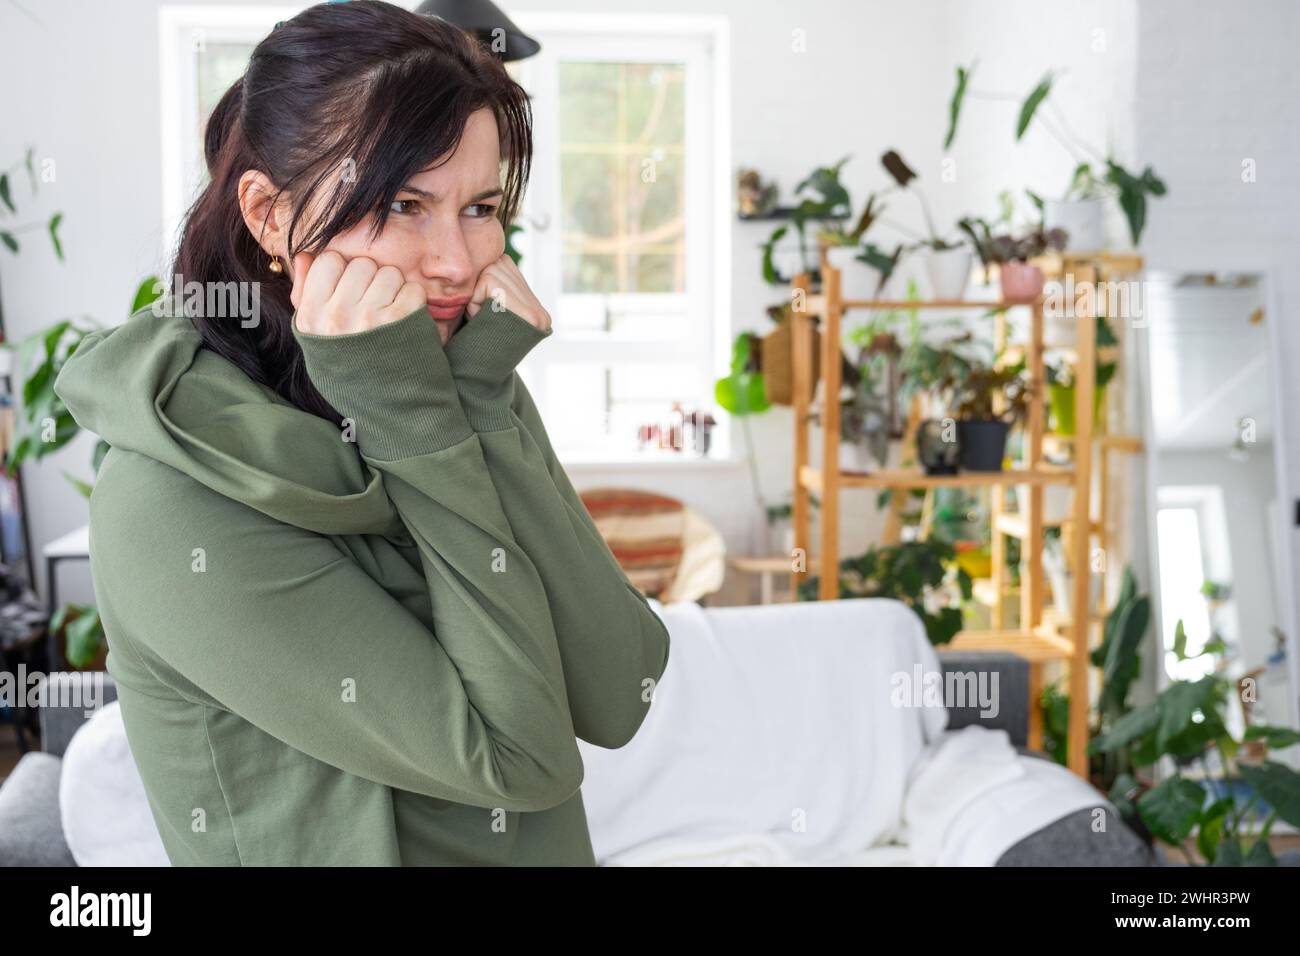 Distressed and Thoughtful emotions of a woman in her home in a bright modern interior with home plants. Portrait of a upset and Stock Photo